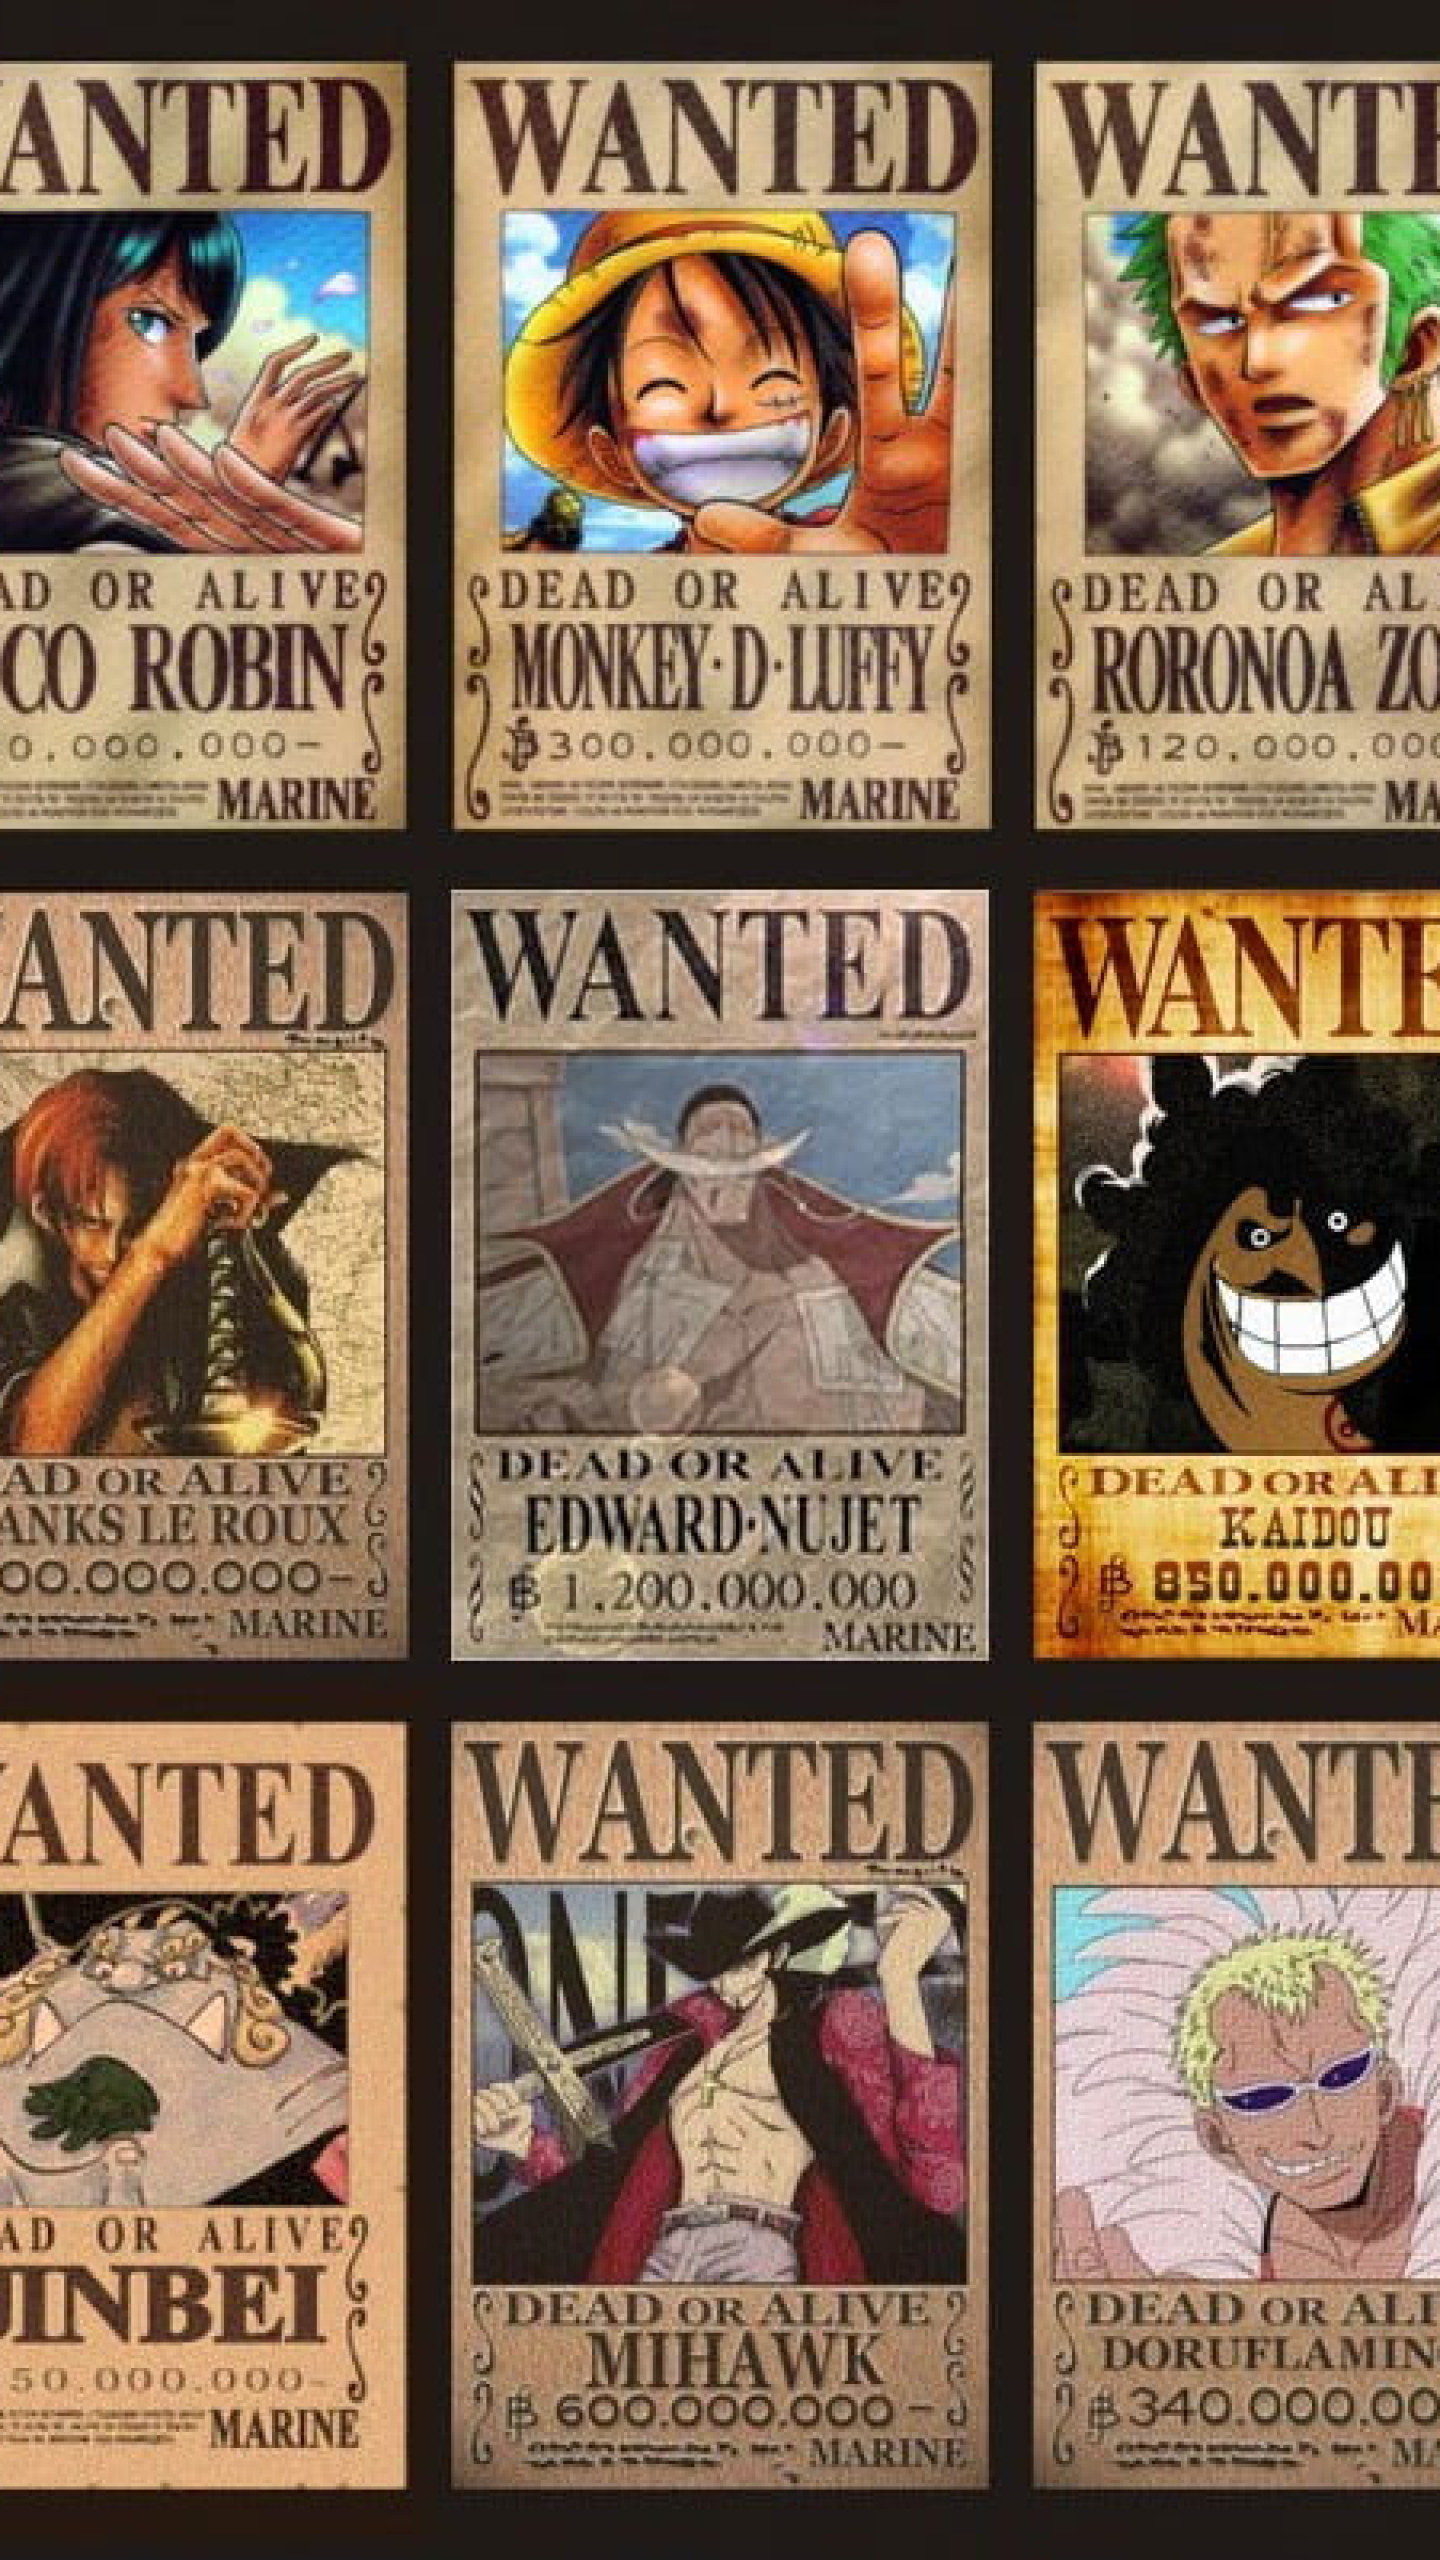 OnePiece Wanted List Wallpaper, One Piece Character Wanted Poster Collage Photo • Wallpaper For You